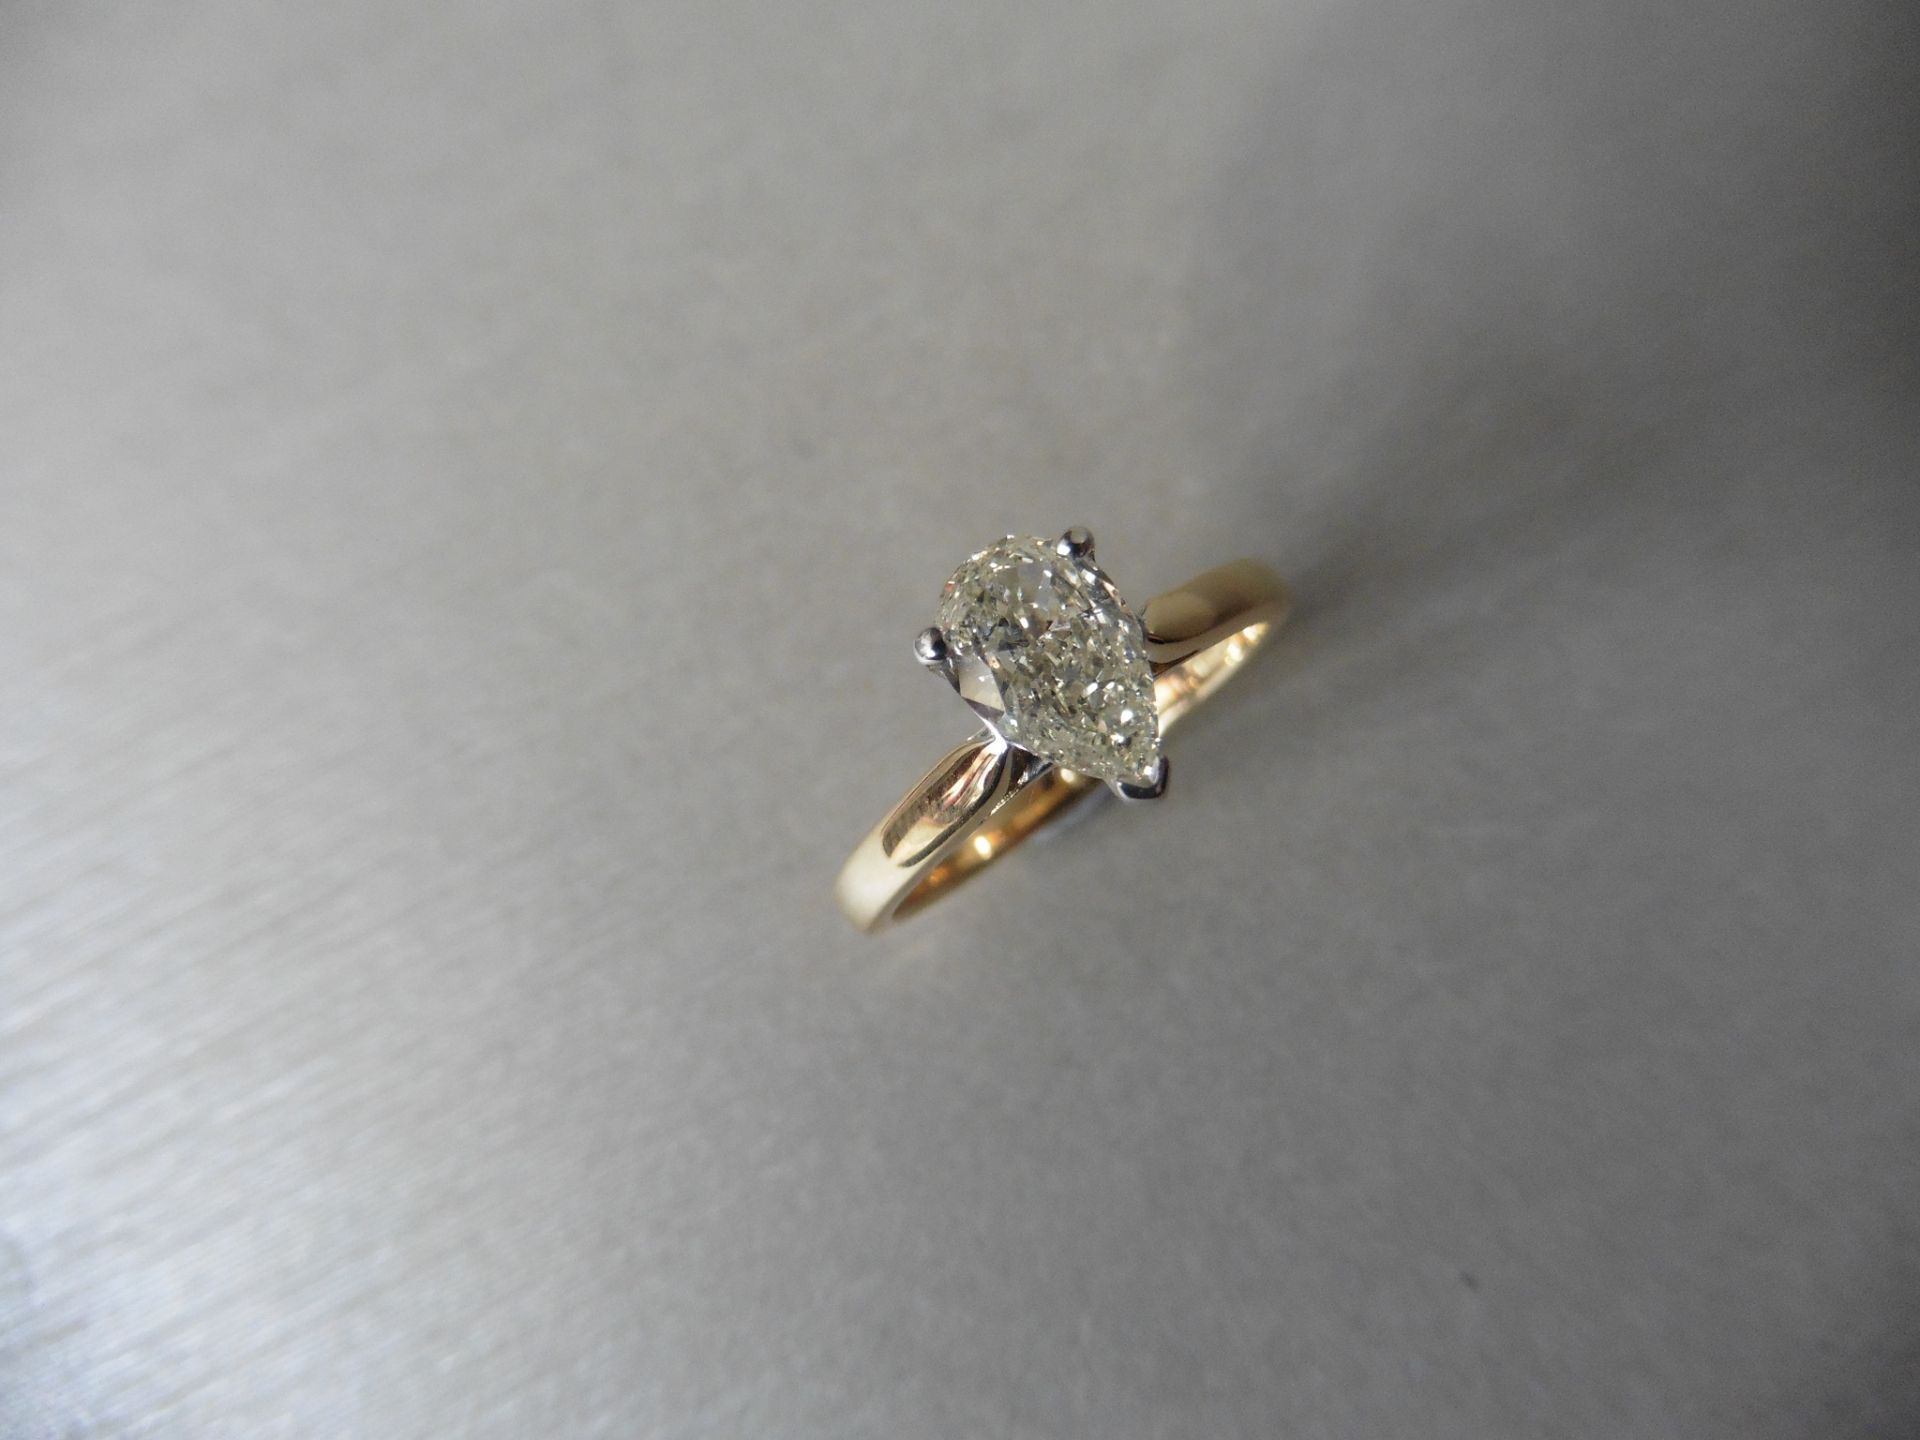 0.81ct pear shaped diamond solitaire ring. J/K colour VS clarity. 3 claw setting in white gold